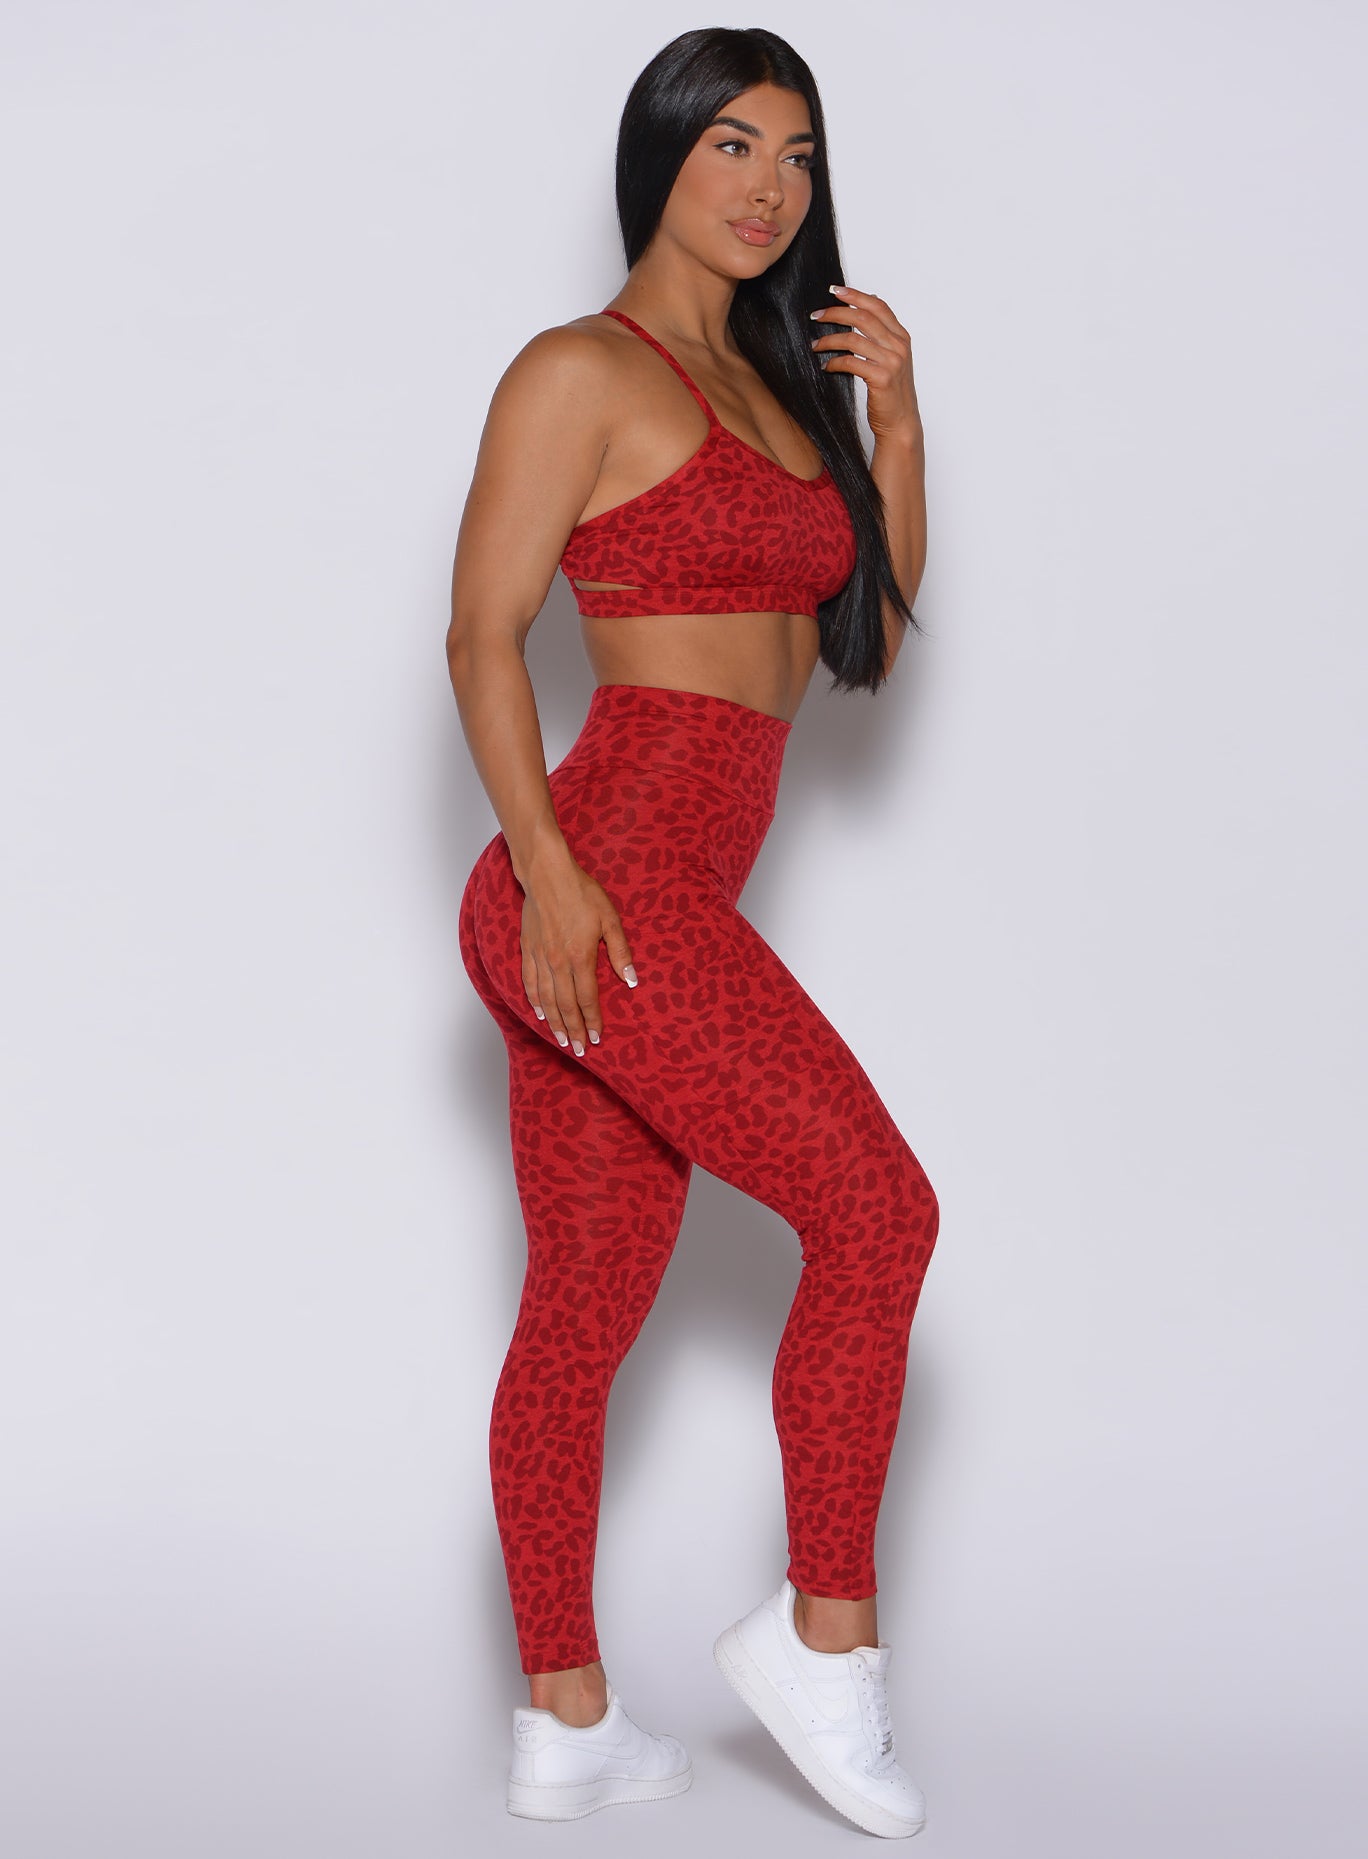 Right side profile view of a model wearing our curves leggings in red cheetah color and a matching sports bra